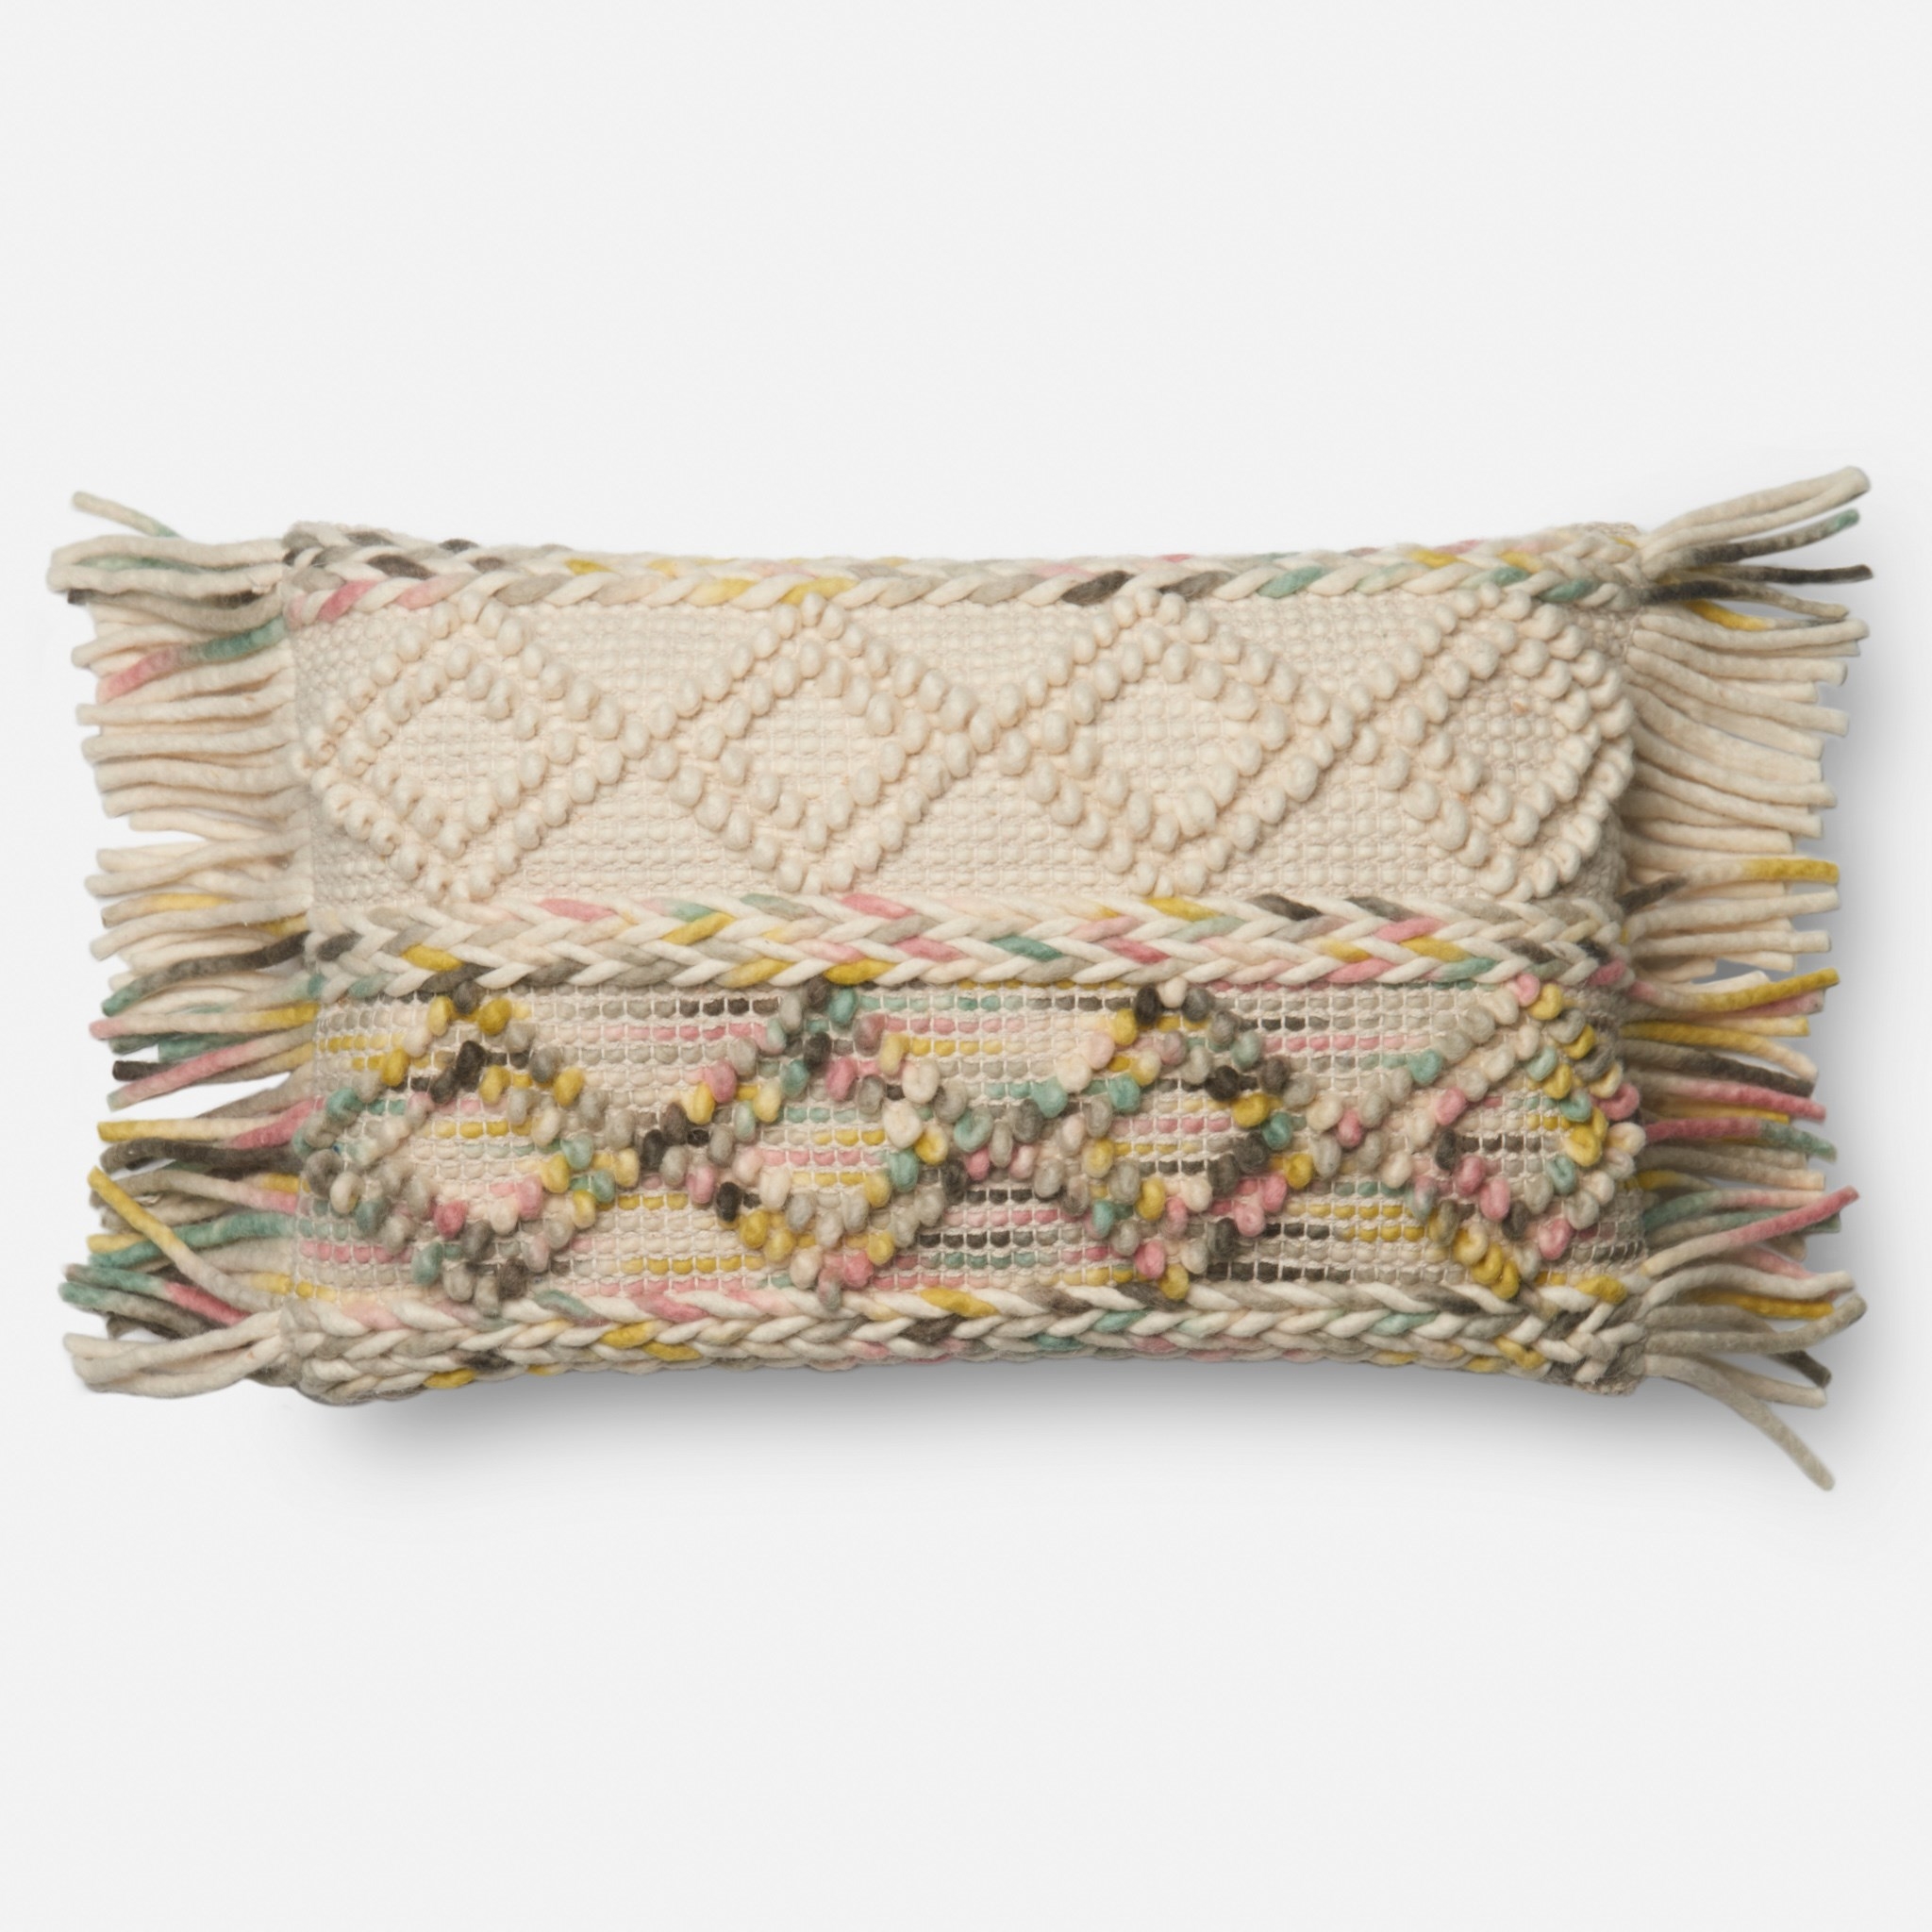 Magnolia Home by Joanna Gaines x Loloi Pillows P1060 Multi 13" x 21" Cover Only - Image 0